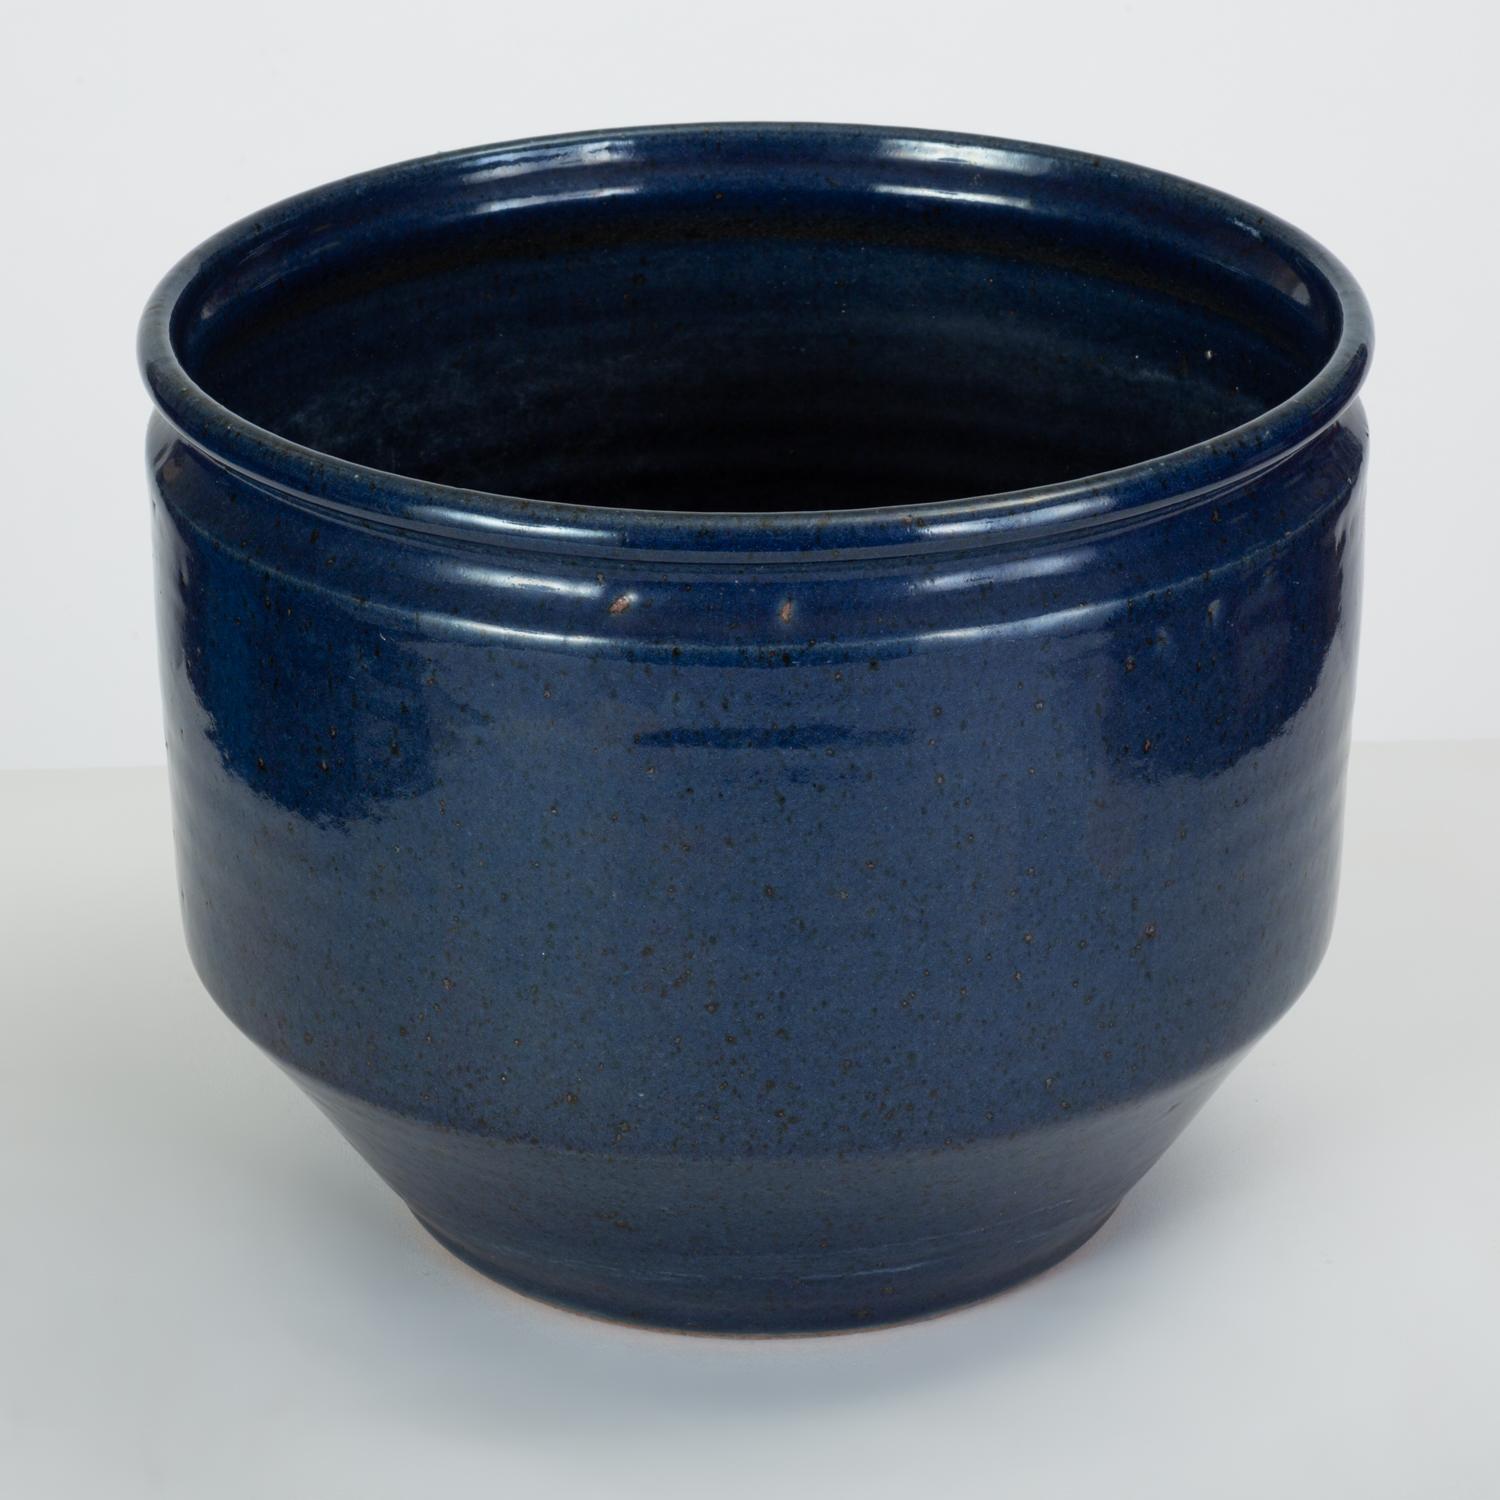 Pair of Blue-Glazed Earthgender Bowl Planters, David Cressey and Robert Maxwell 8